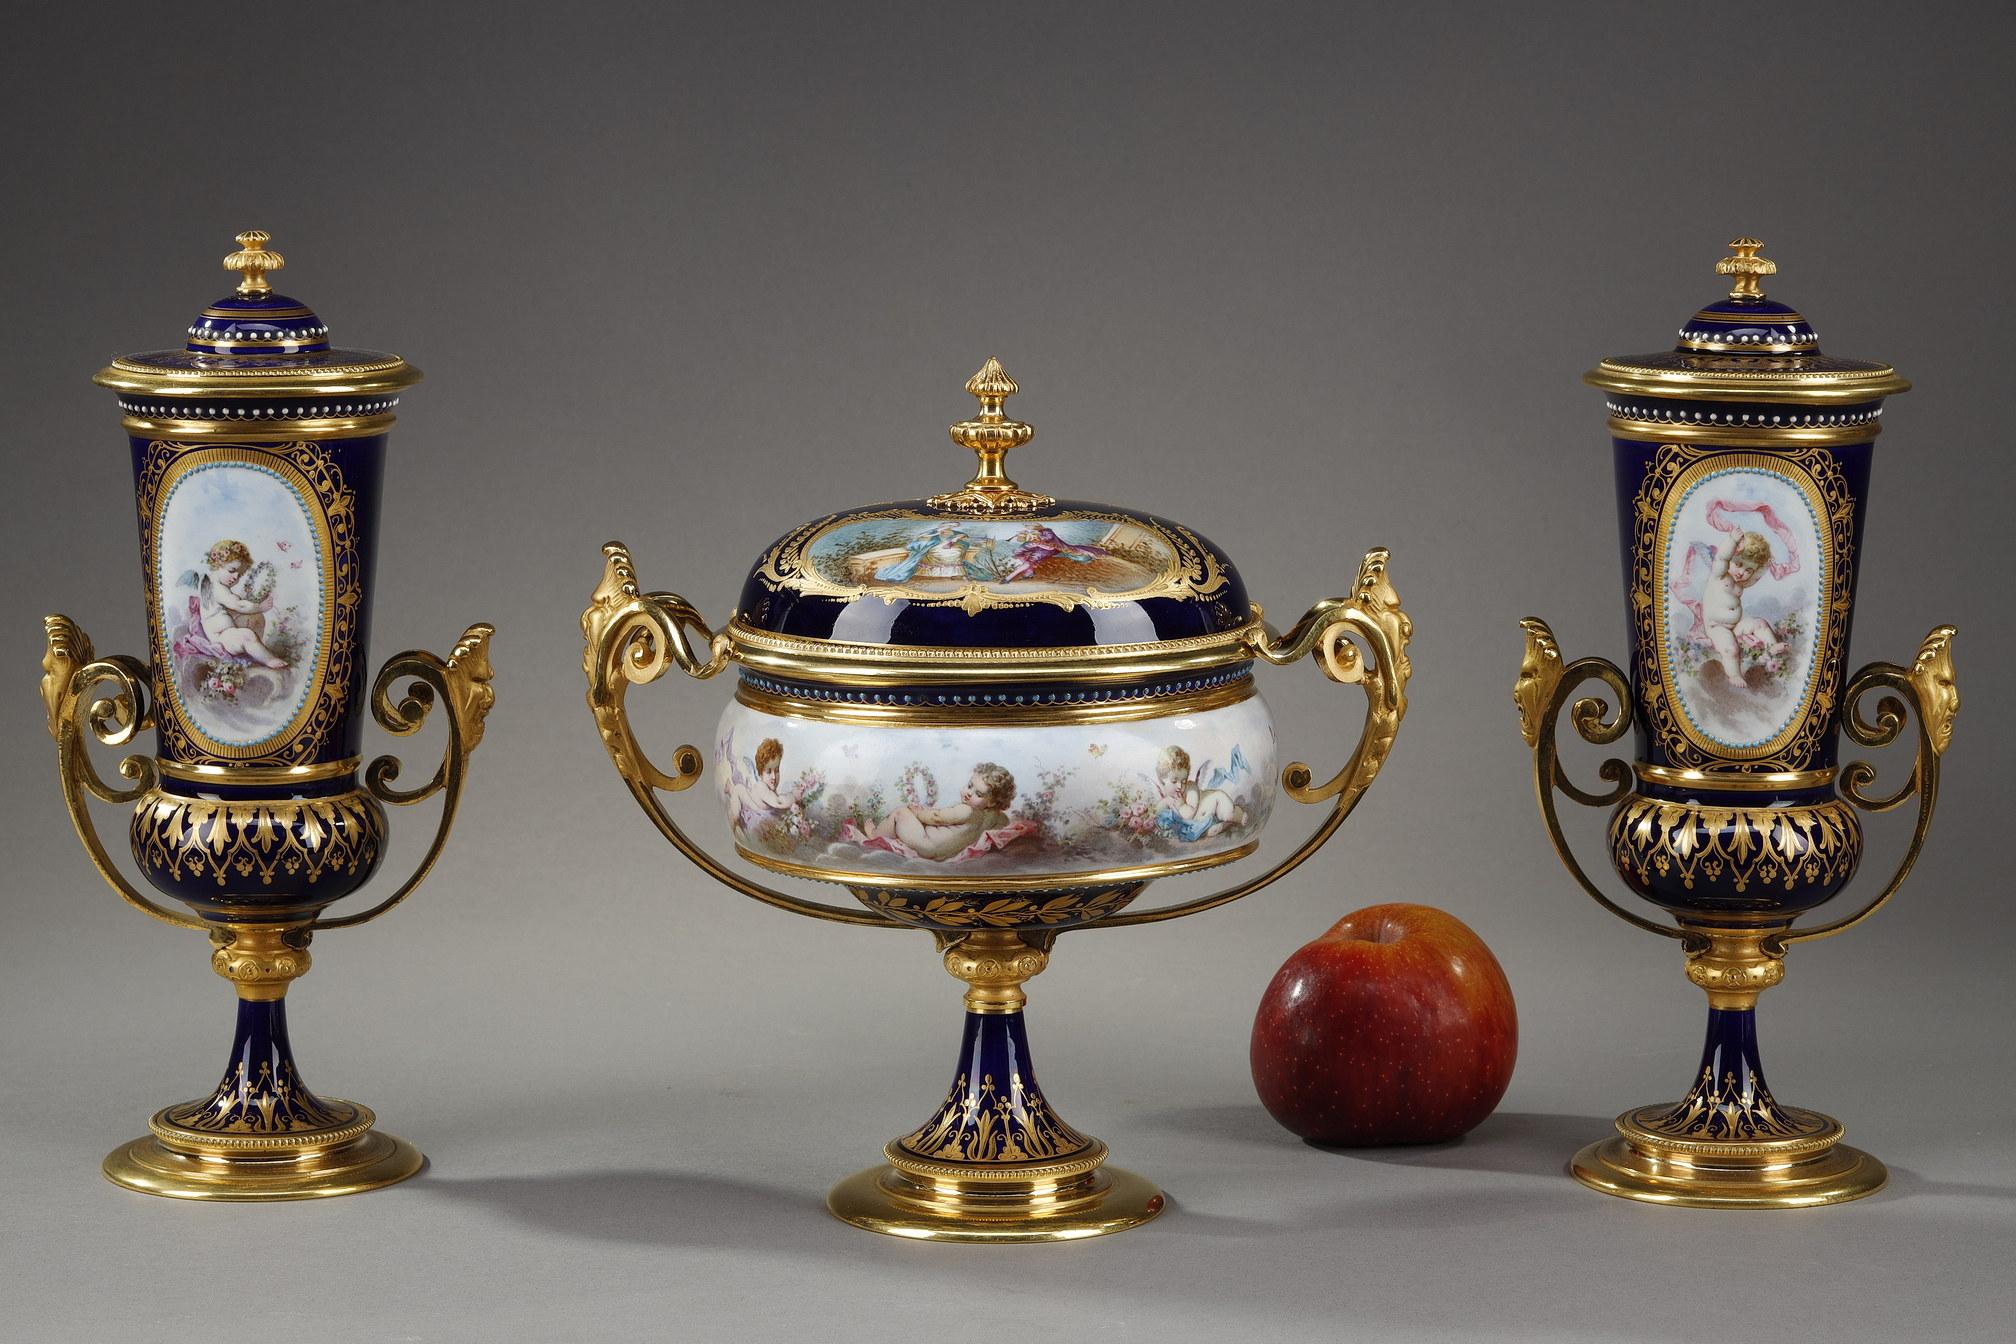 Ensemble composed of a cup and two vases in Sevres porcelain with a blue background. The elements are mounted in gilded and chased bronze with handles decorated with grotesque masks and scrolls. The background is decorated with interlacing and